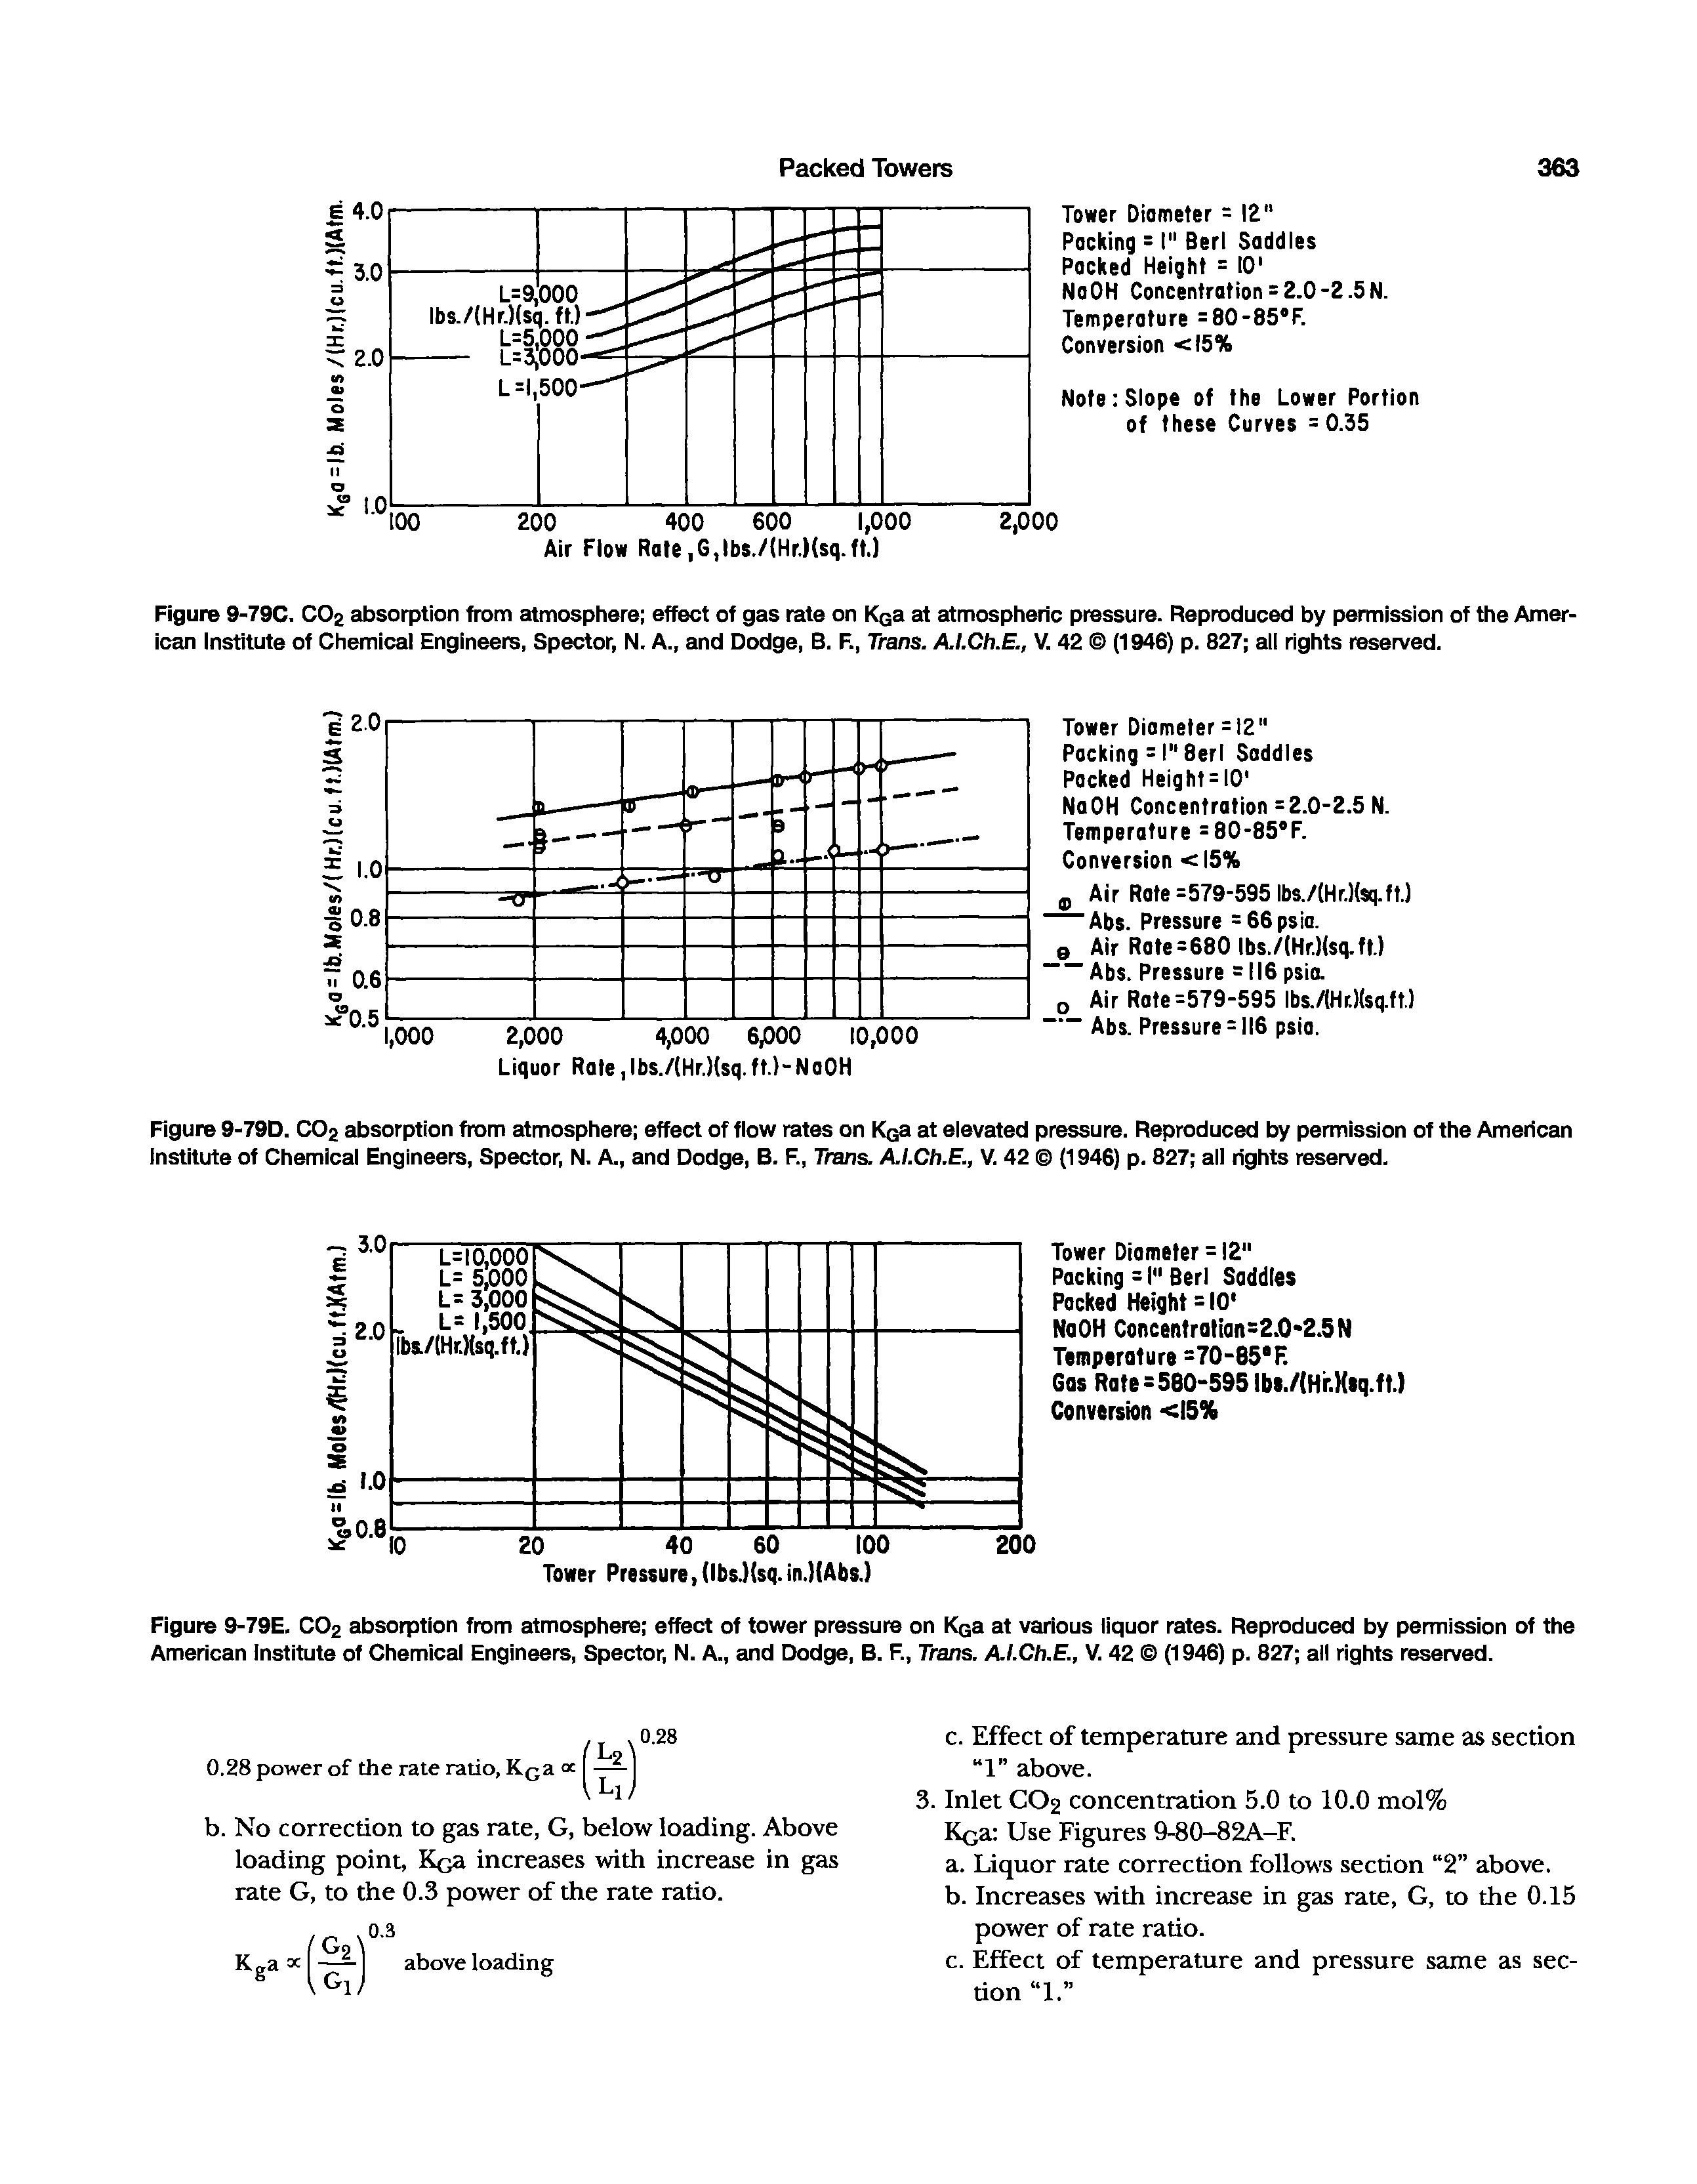 Figure 9-79E. CO2 absorption from atmosphere effect of tower pressure on ICqs at veirious liquor rates. Reproduced by pemrrission of the American Institute of Chemical Engineers, Spector, N. A., emd Dodge, B. F., Trans. AI.Ch.E., V. 42 (1946) p. 827 all rights reserved.